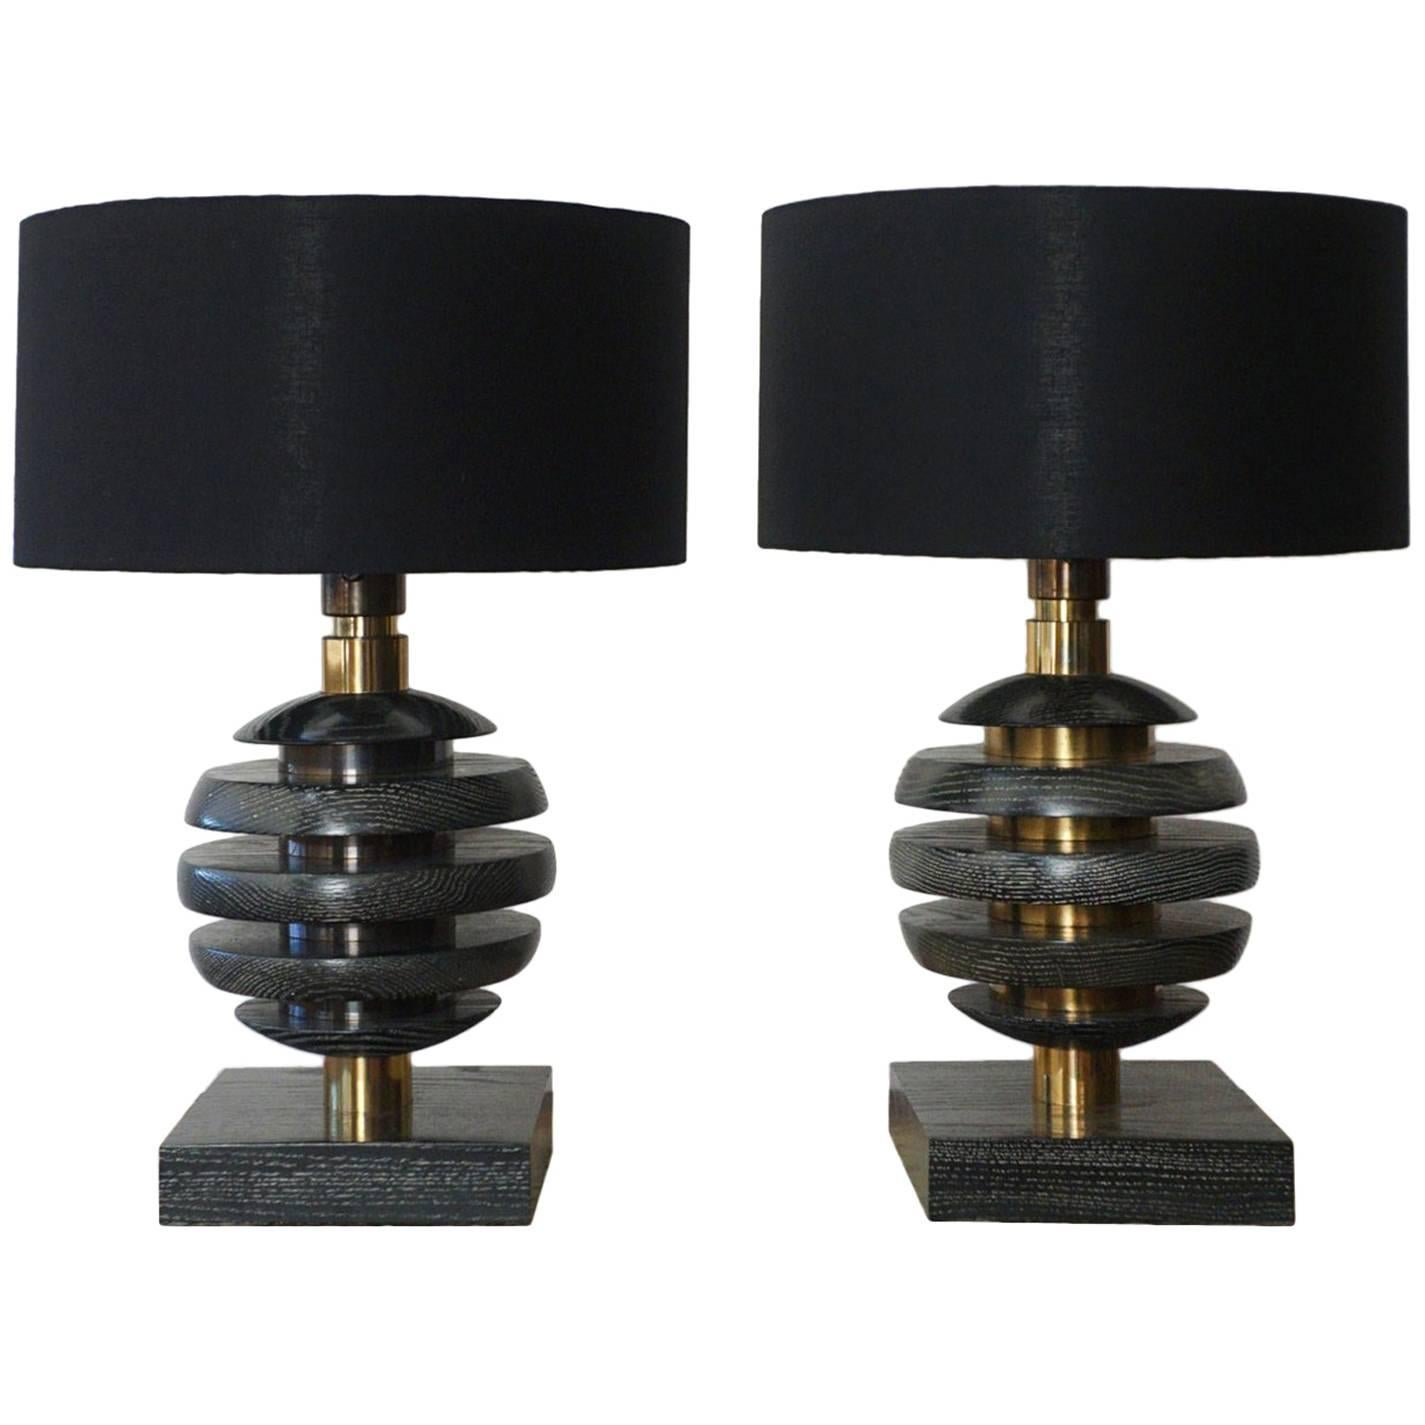 Pair of Black Cerused Oak and Brass Table Lamps, 1940s